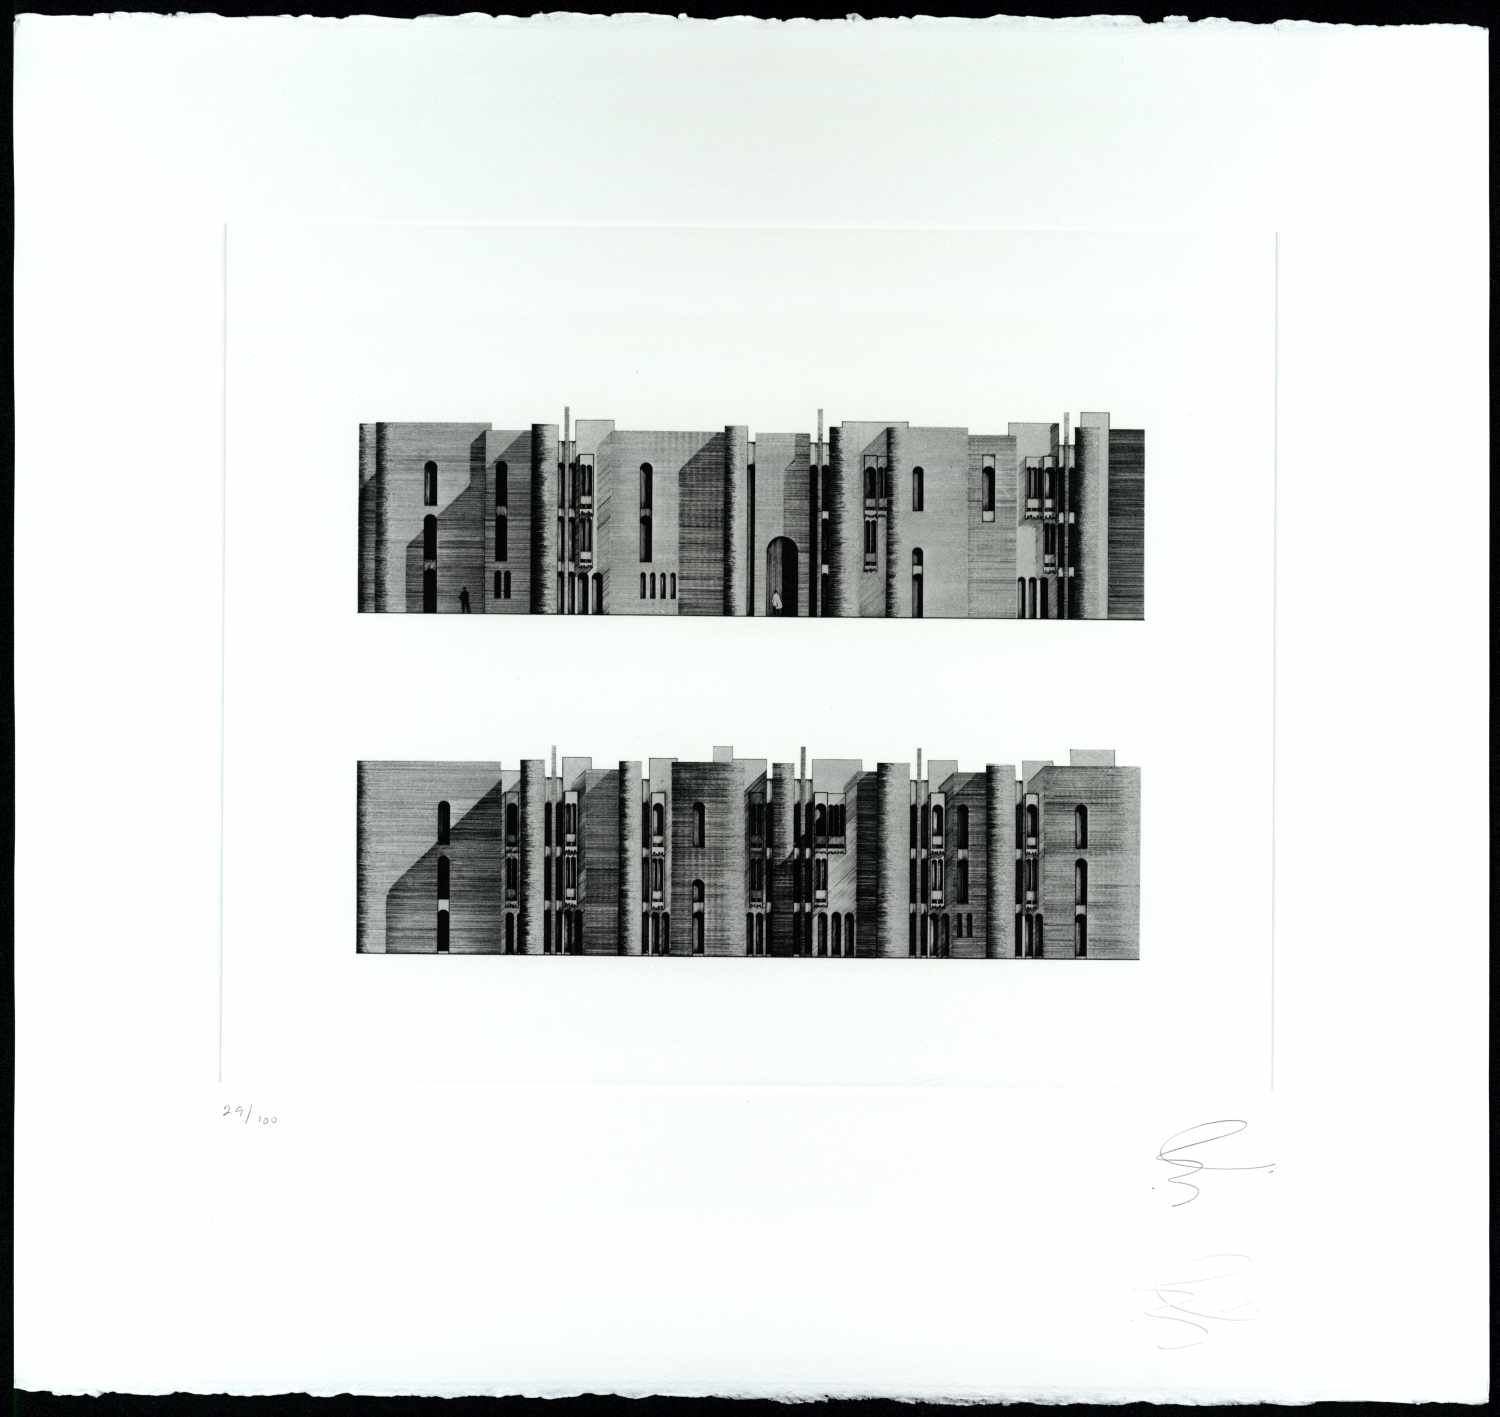 Offices and Tobacco Warehouses - Elevation of Tobacco Monopoly Offices and Stores (1967, Baghdad). From&nbsp;<span style="font-style: italic;">The Architecture of Rifat Chadirji: A Collection of Twelve Etchings</span>.